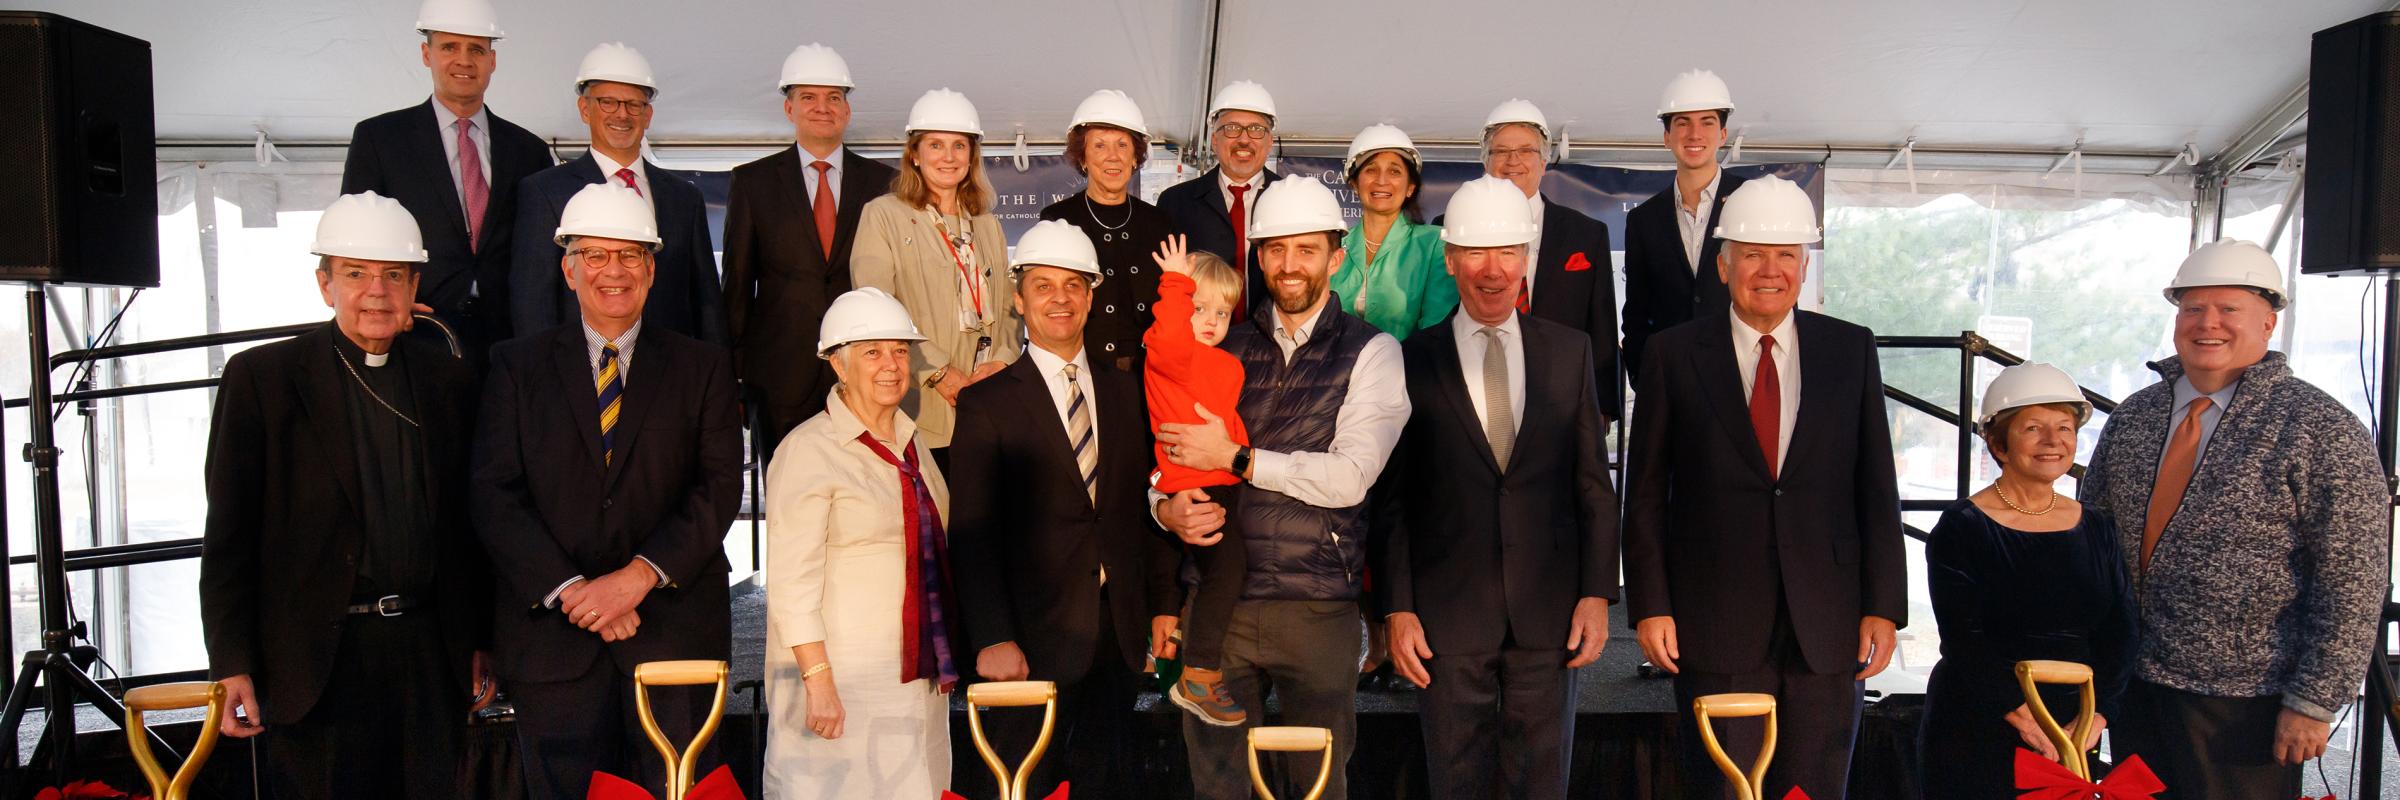 Board members, VIPs, and a child pose in front of golden shovels